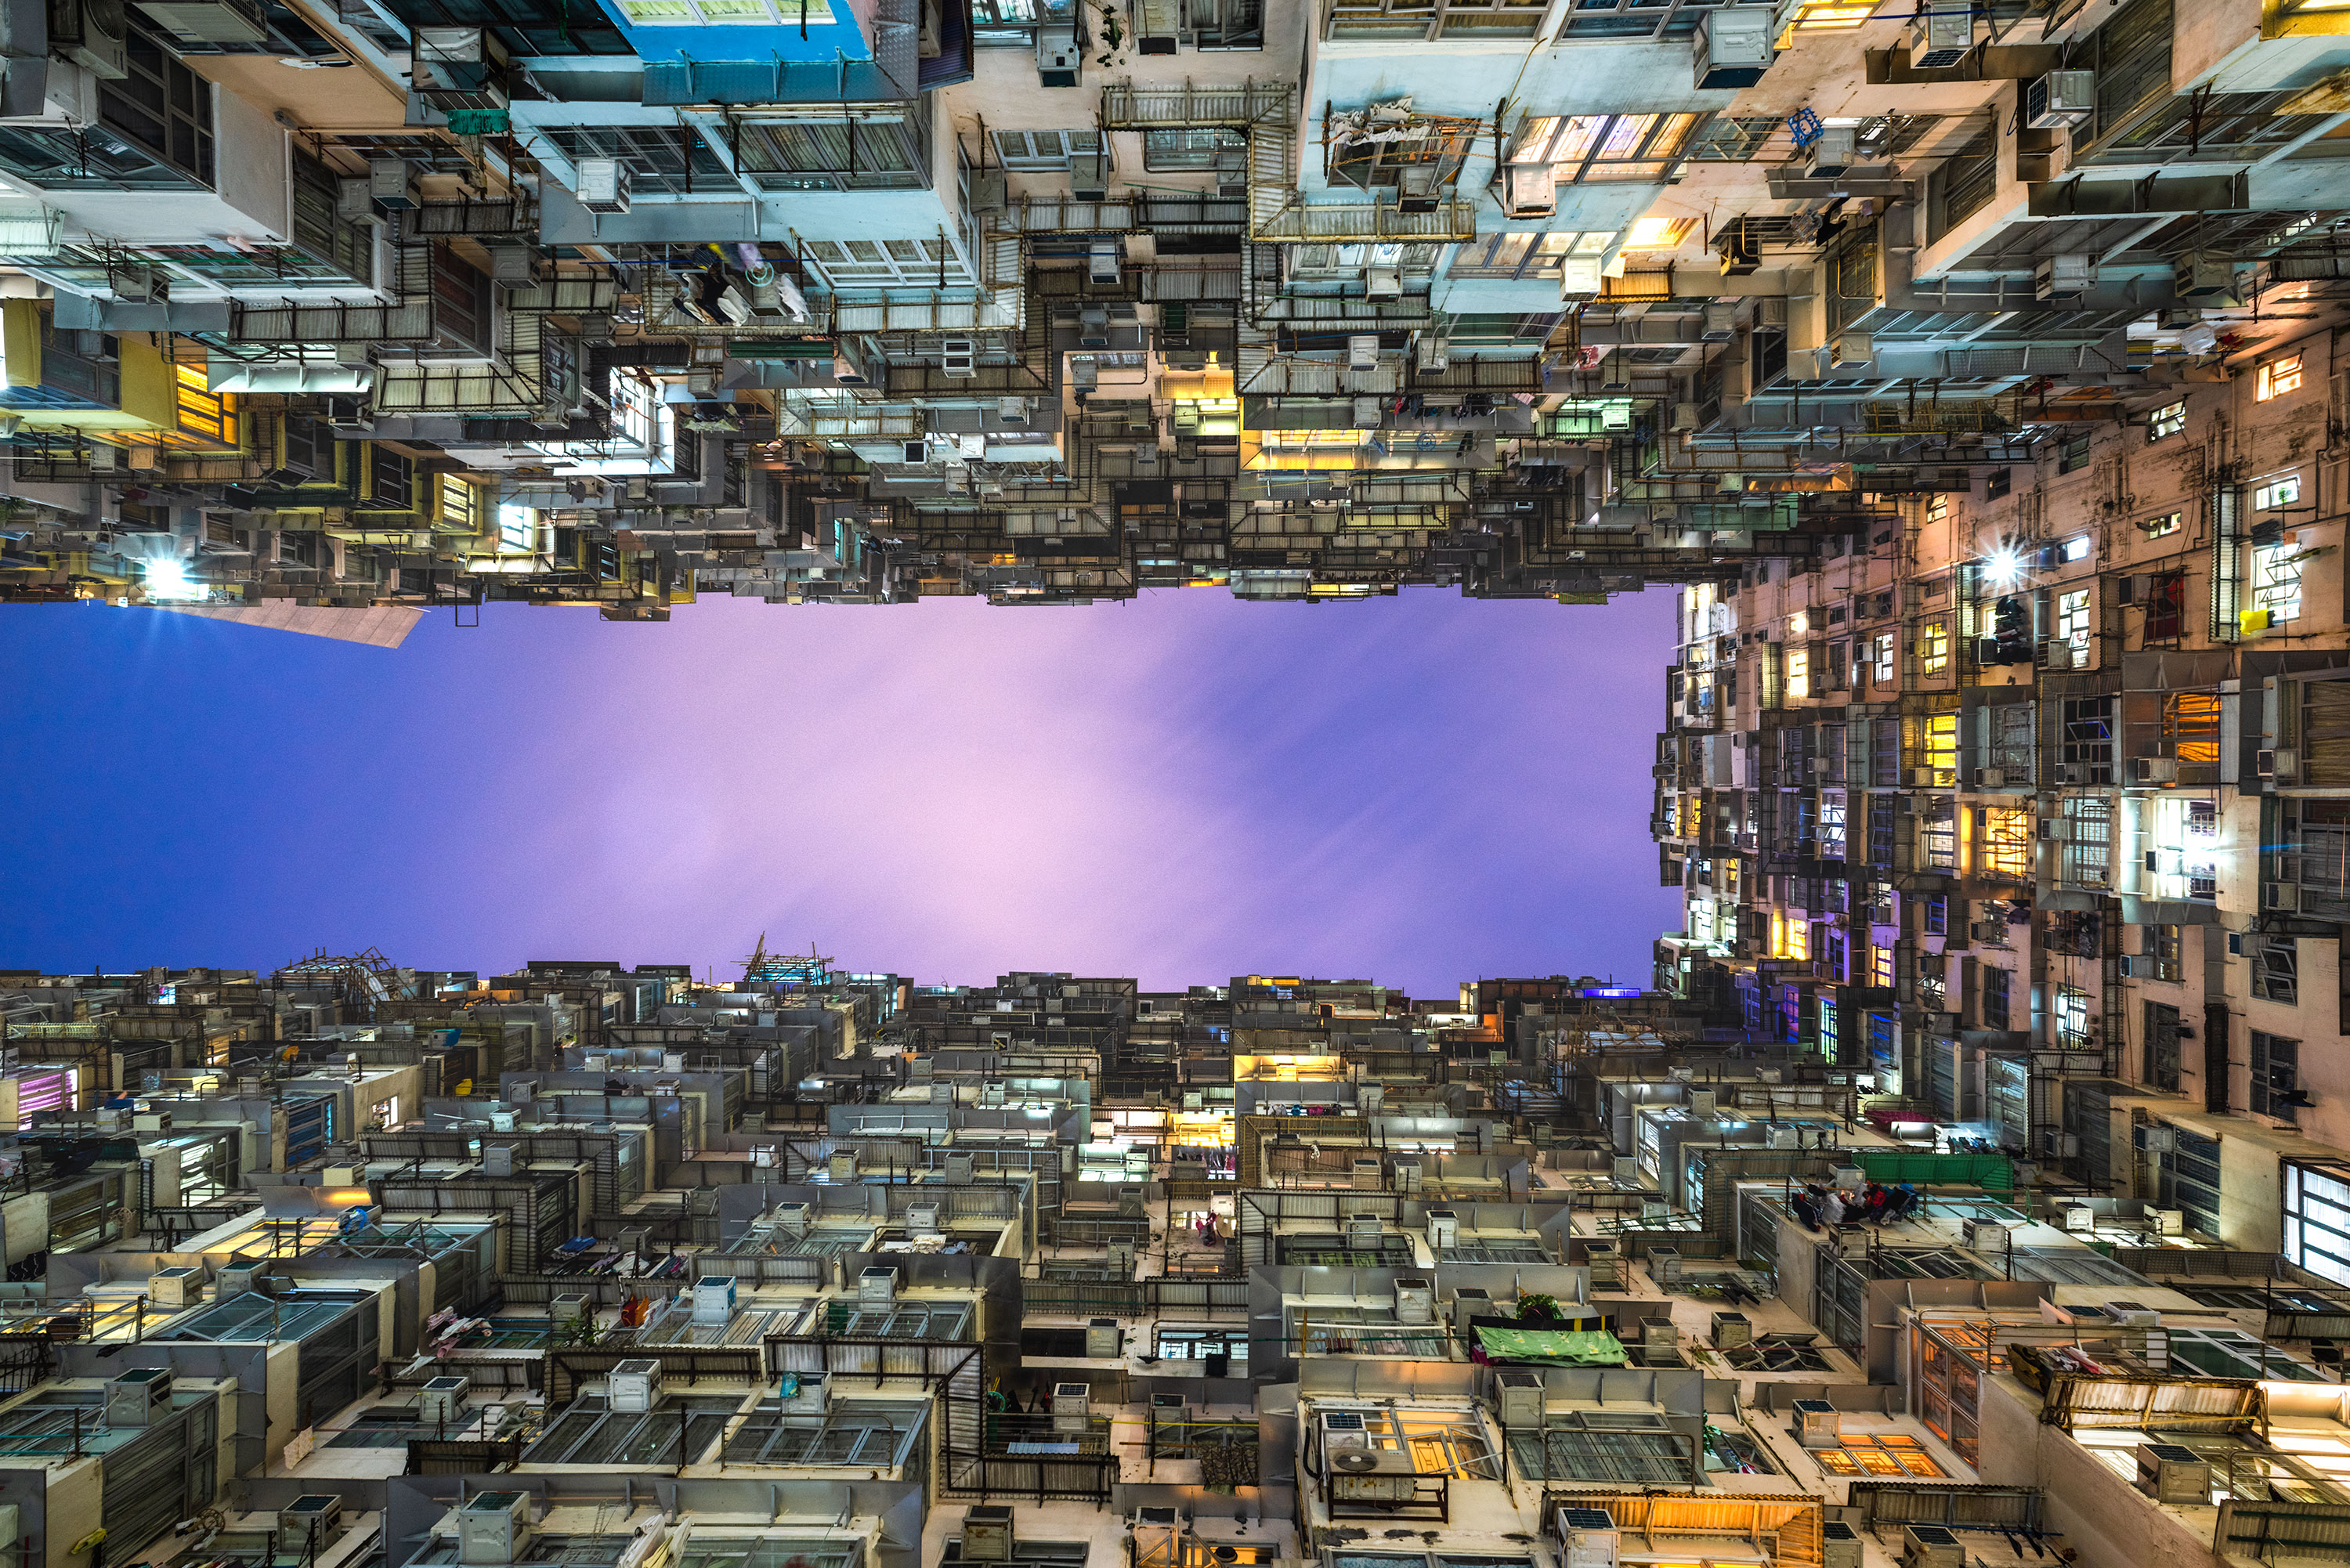 Night photography of the monster building in Hong Kong taken by Jennifer Esseiva.